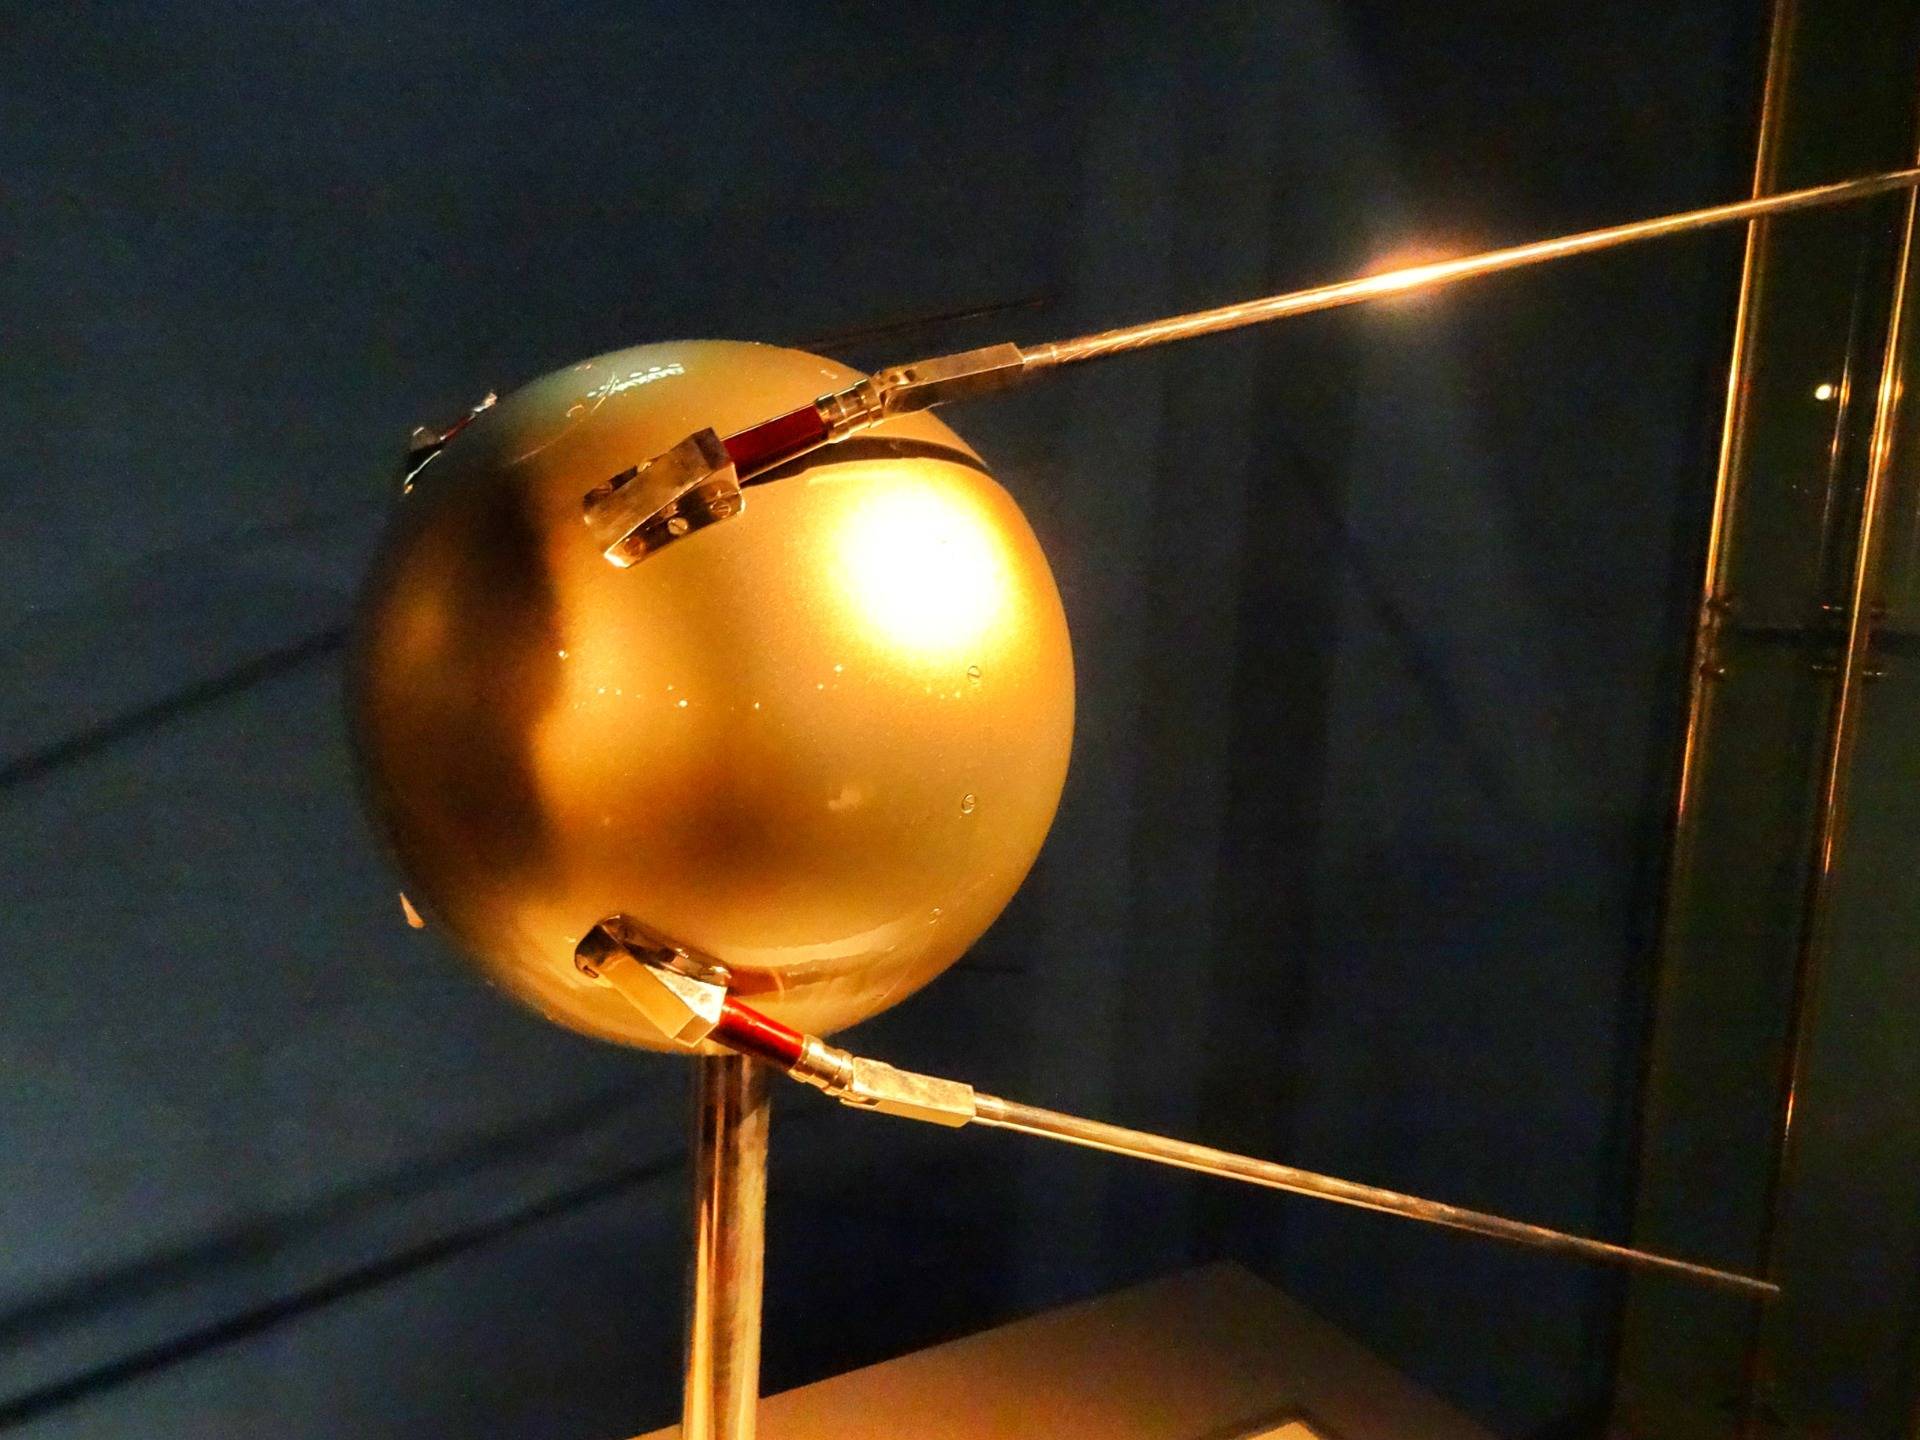 The ”Sputnik”, first man made satellite above earth